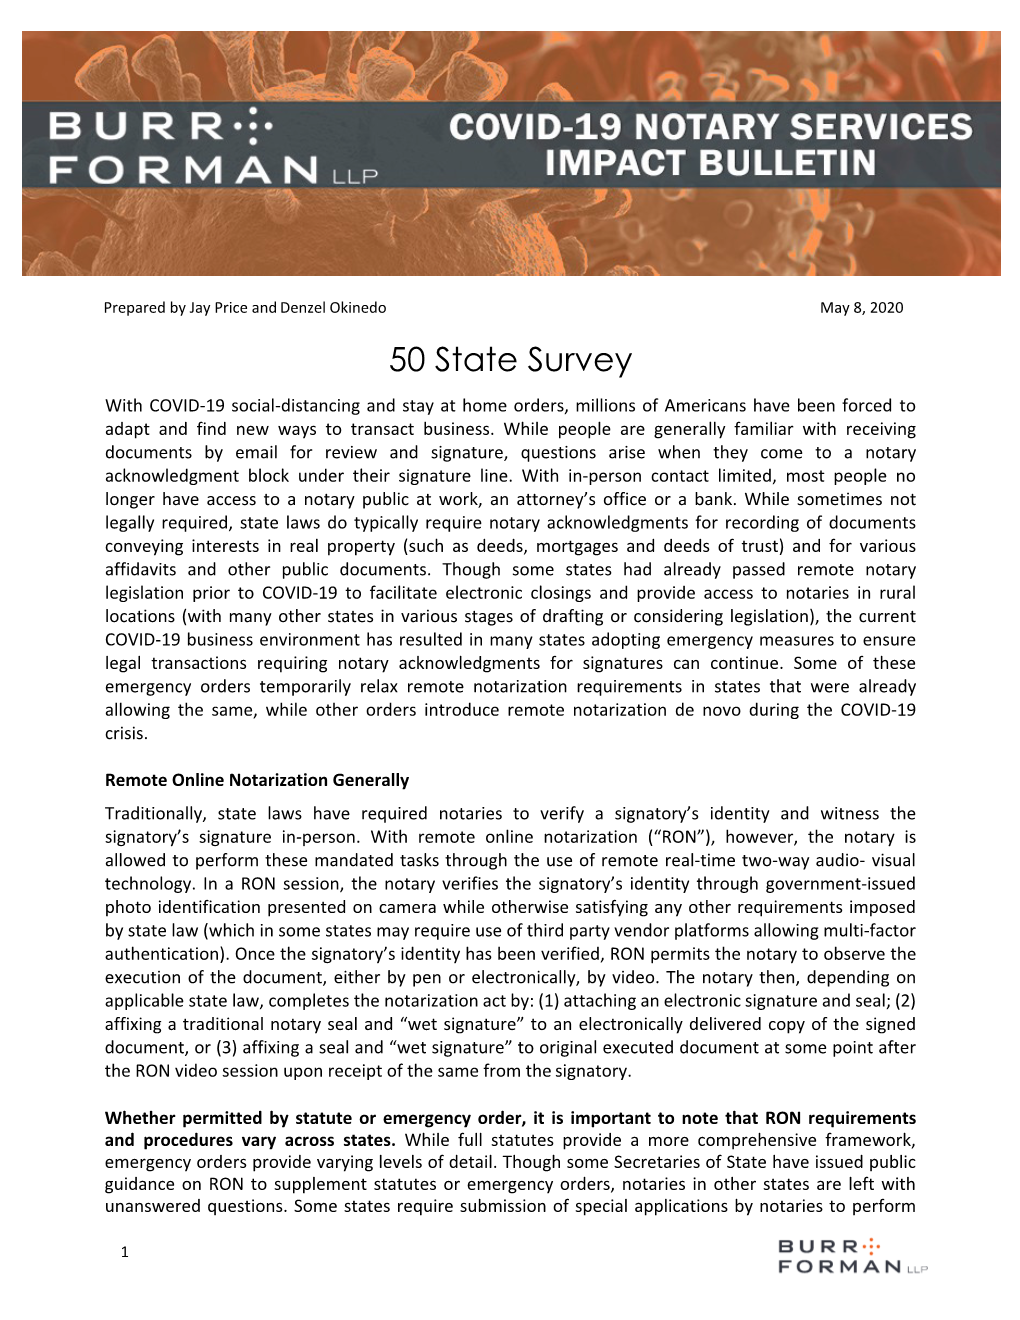 50 State Survey with COVID-19 Social-Distancing and Stay at Home Orders, Millions of Americans Have Been Forced to Adapt and Find New Ways to Transact Business